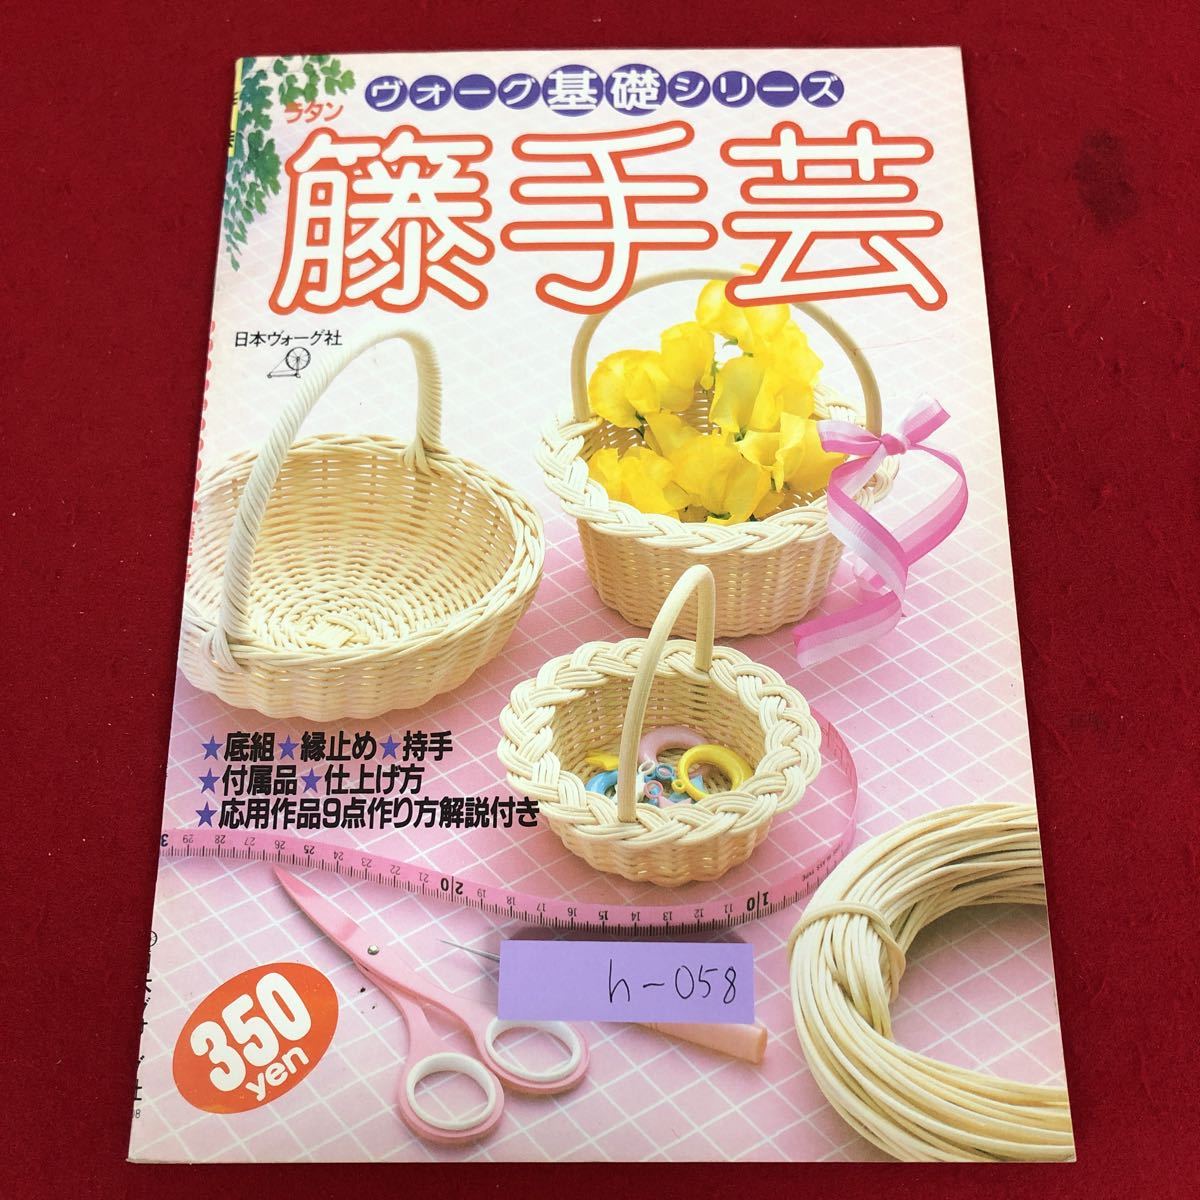 h-058 *9 rattan handicrafts Vogue base series bottom collection . cease . hand accessory finishing person Showa era 58 year 5 month 20 day issue Japan Vogue company handicrafts rattan industrial arts hobby introduction 